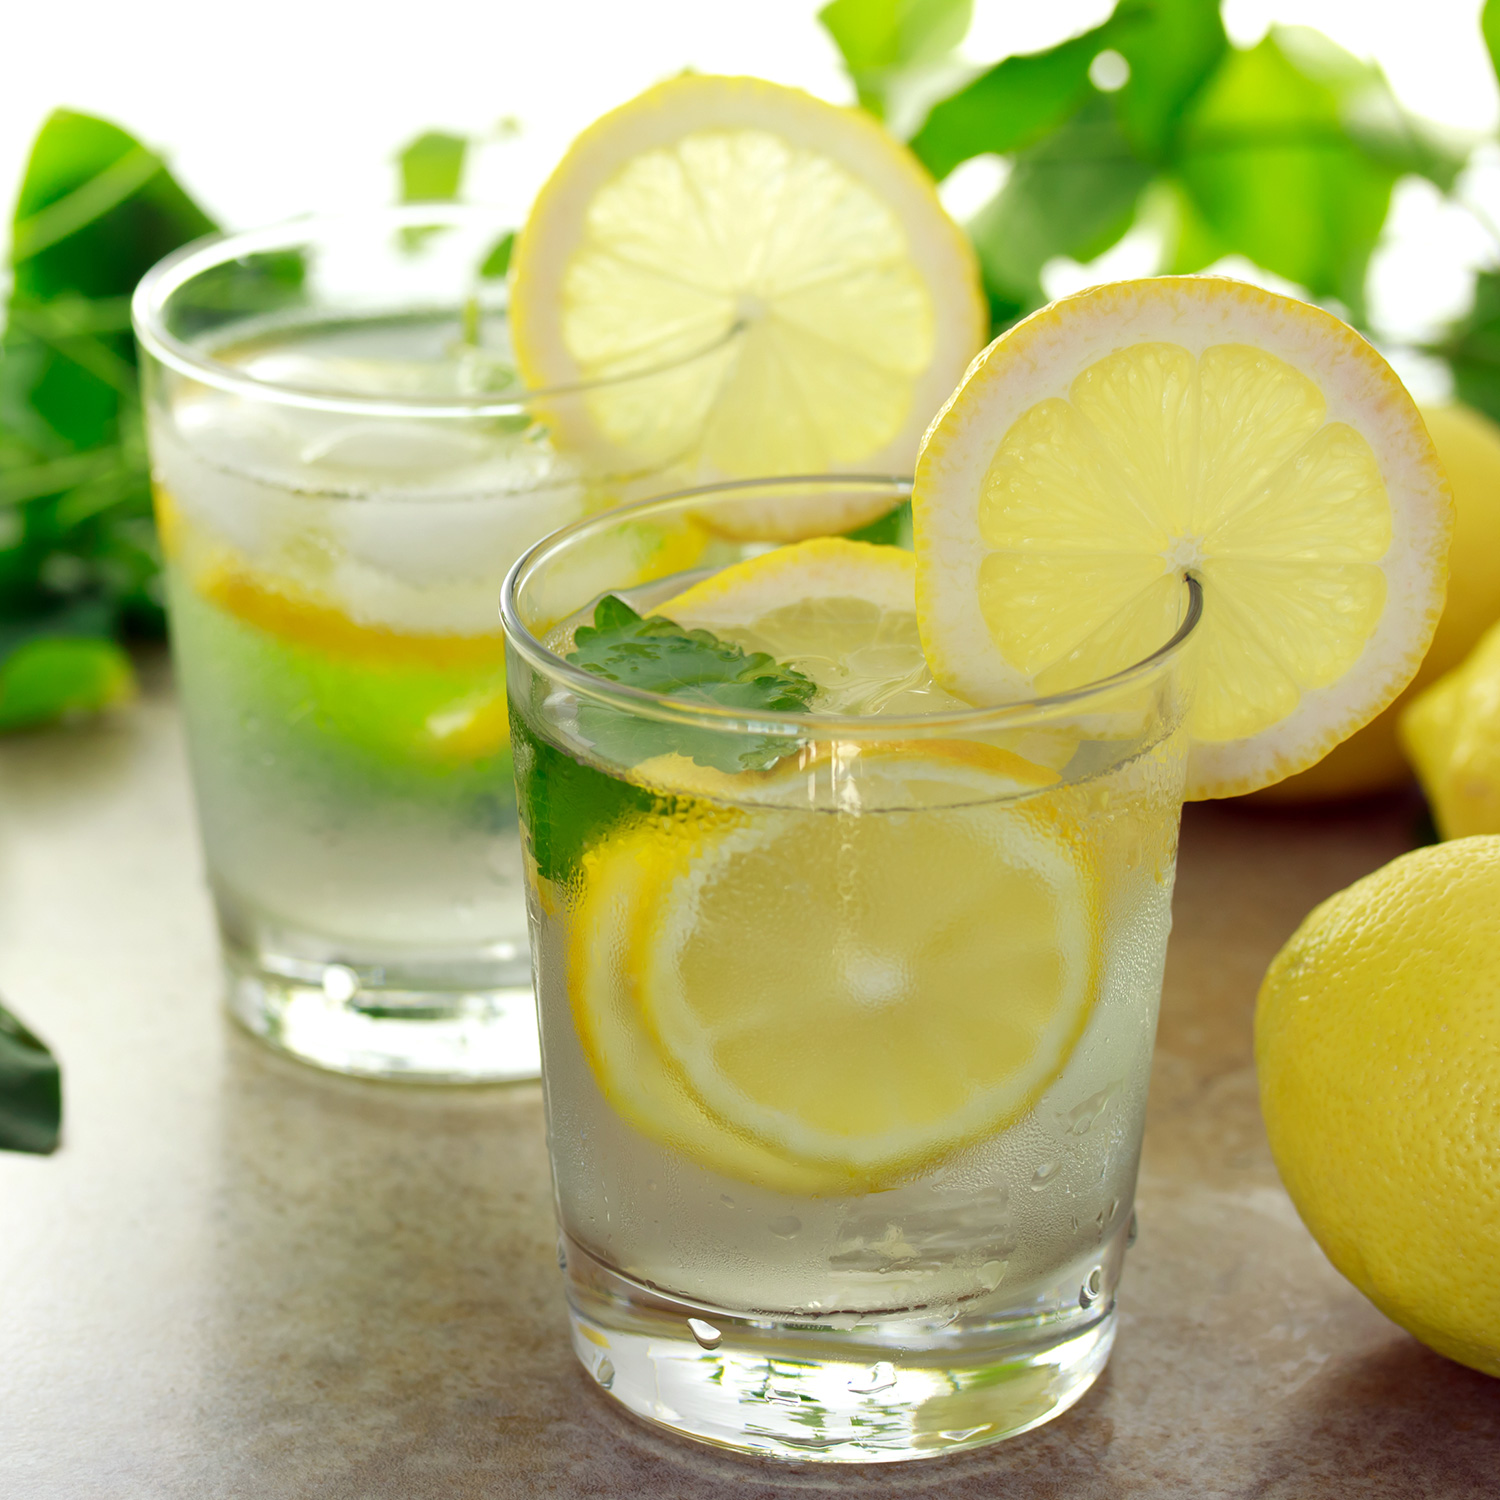 10-Reason-why-you-should-drink-lemon-water-1